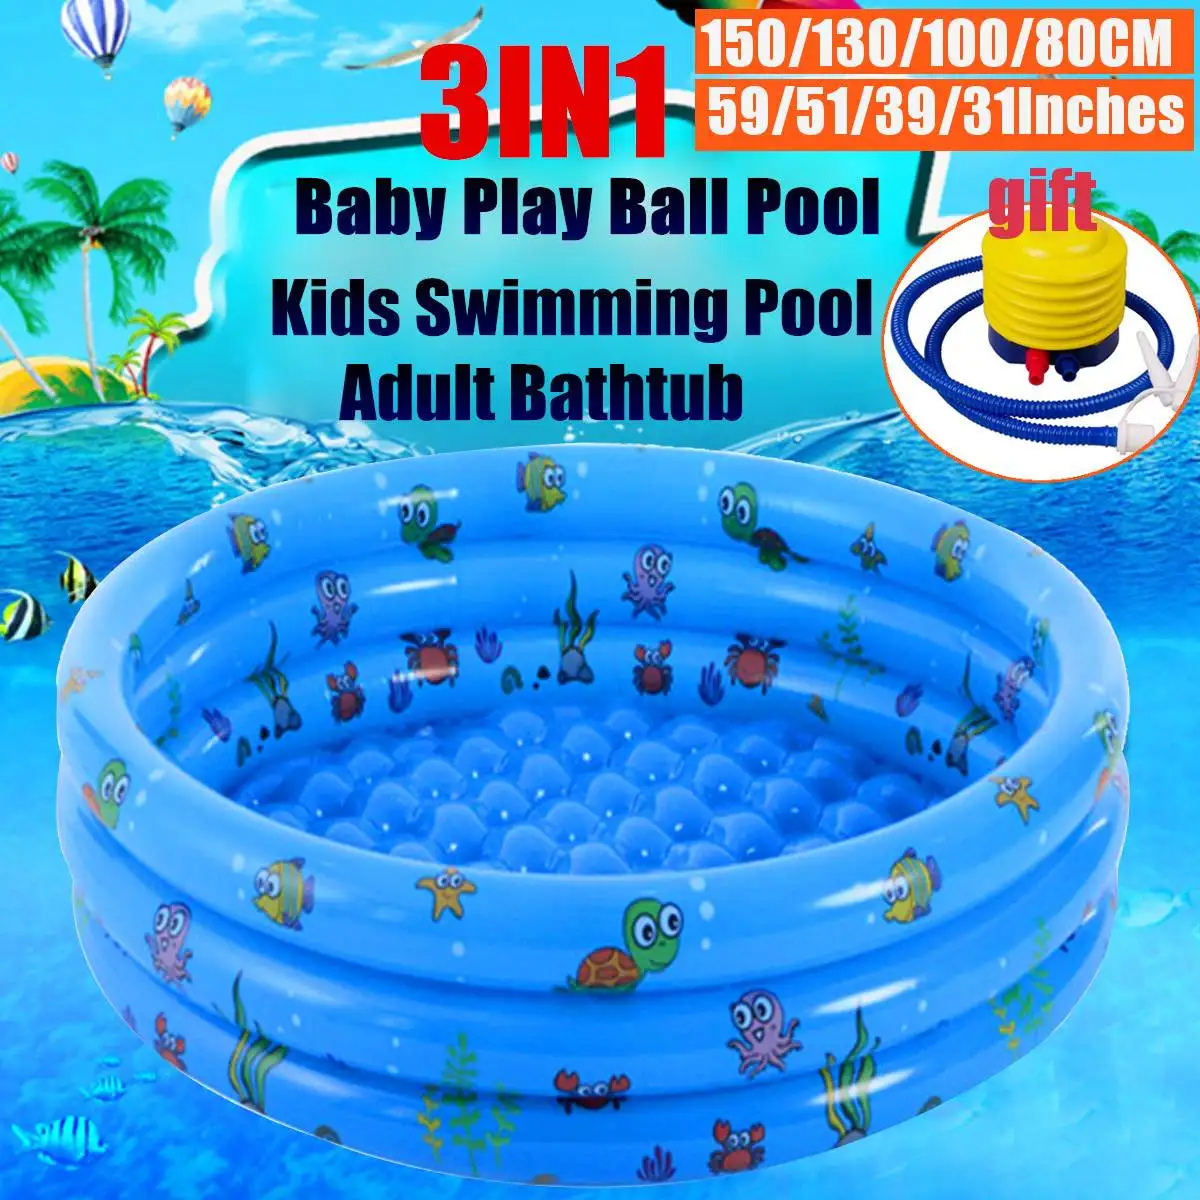 

80/100/130/150CM Portable Indoor Outdoor Swimming Pool Inflatable Children Basin Bathtub kids Ocean Ball Pool Toy Removable Pool